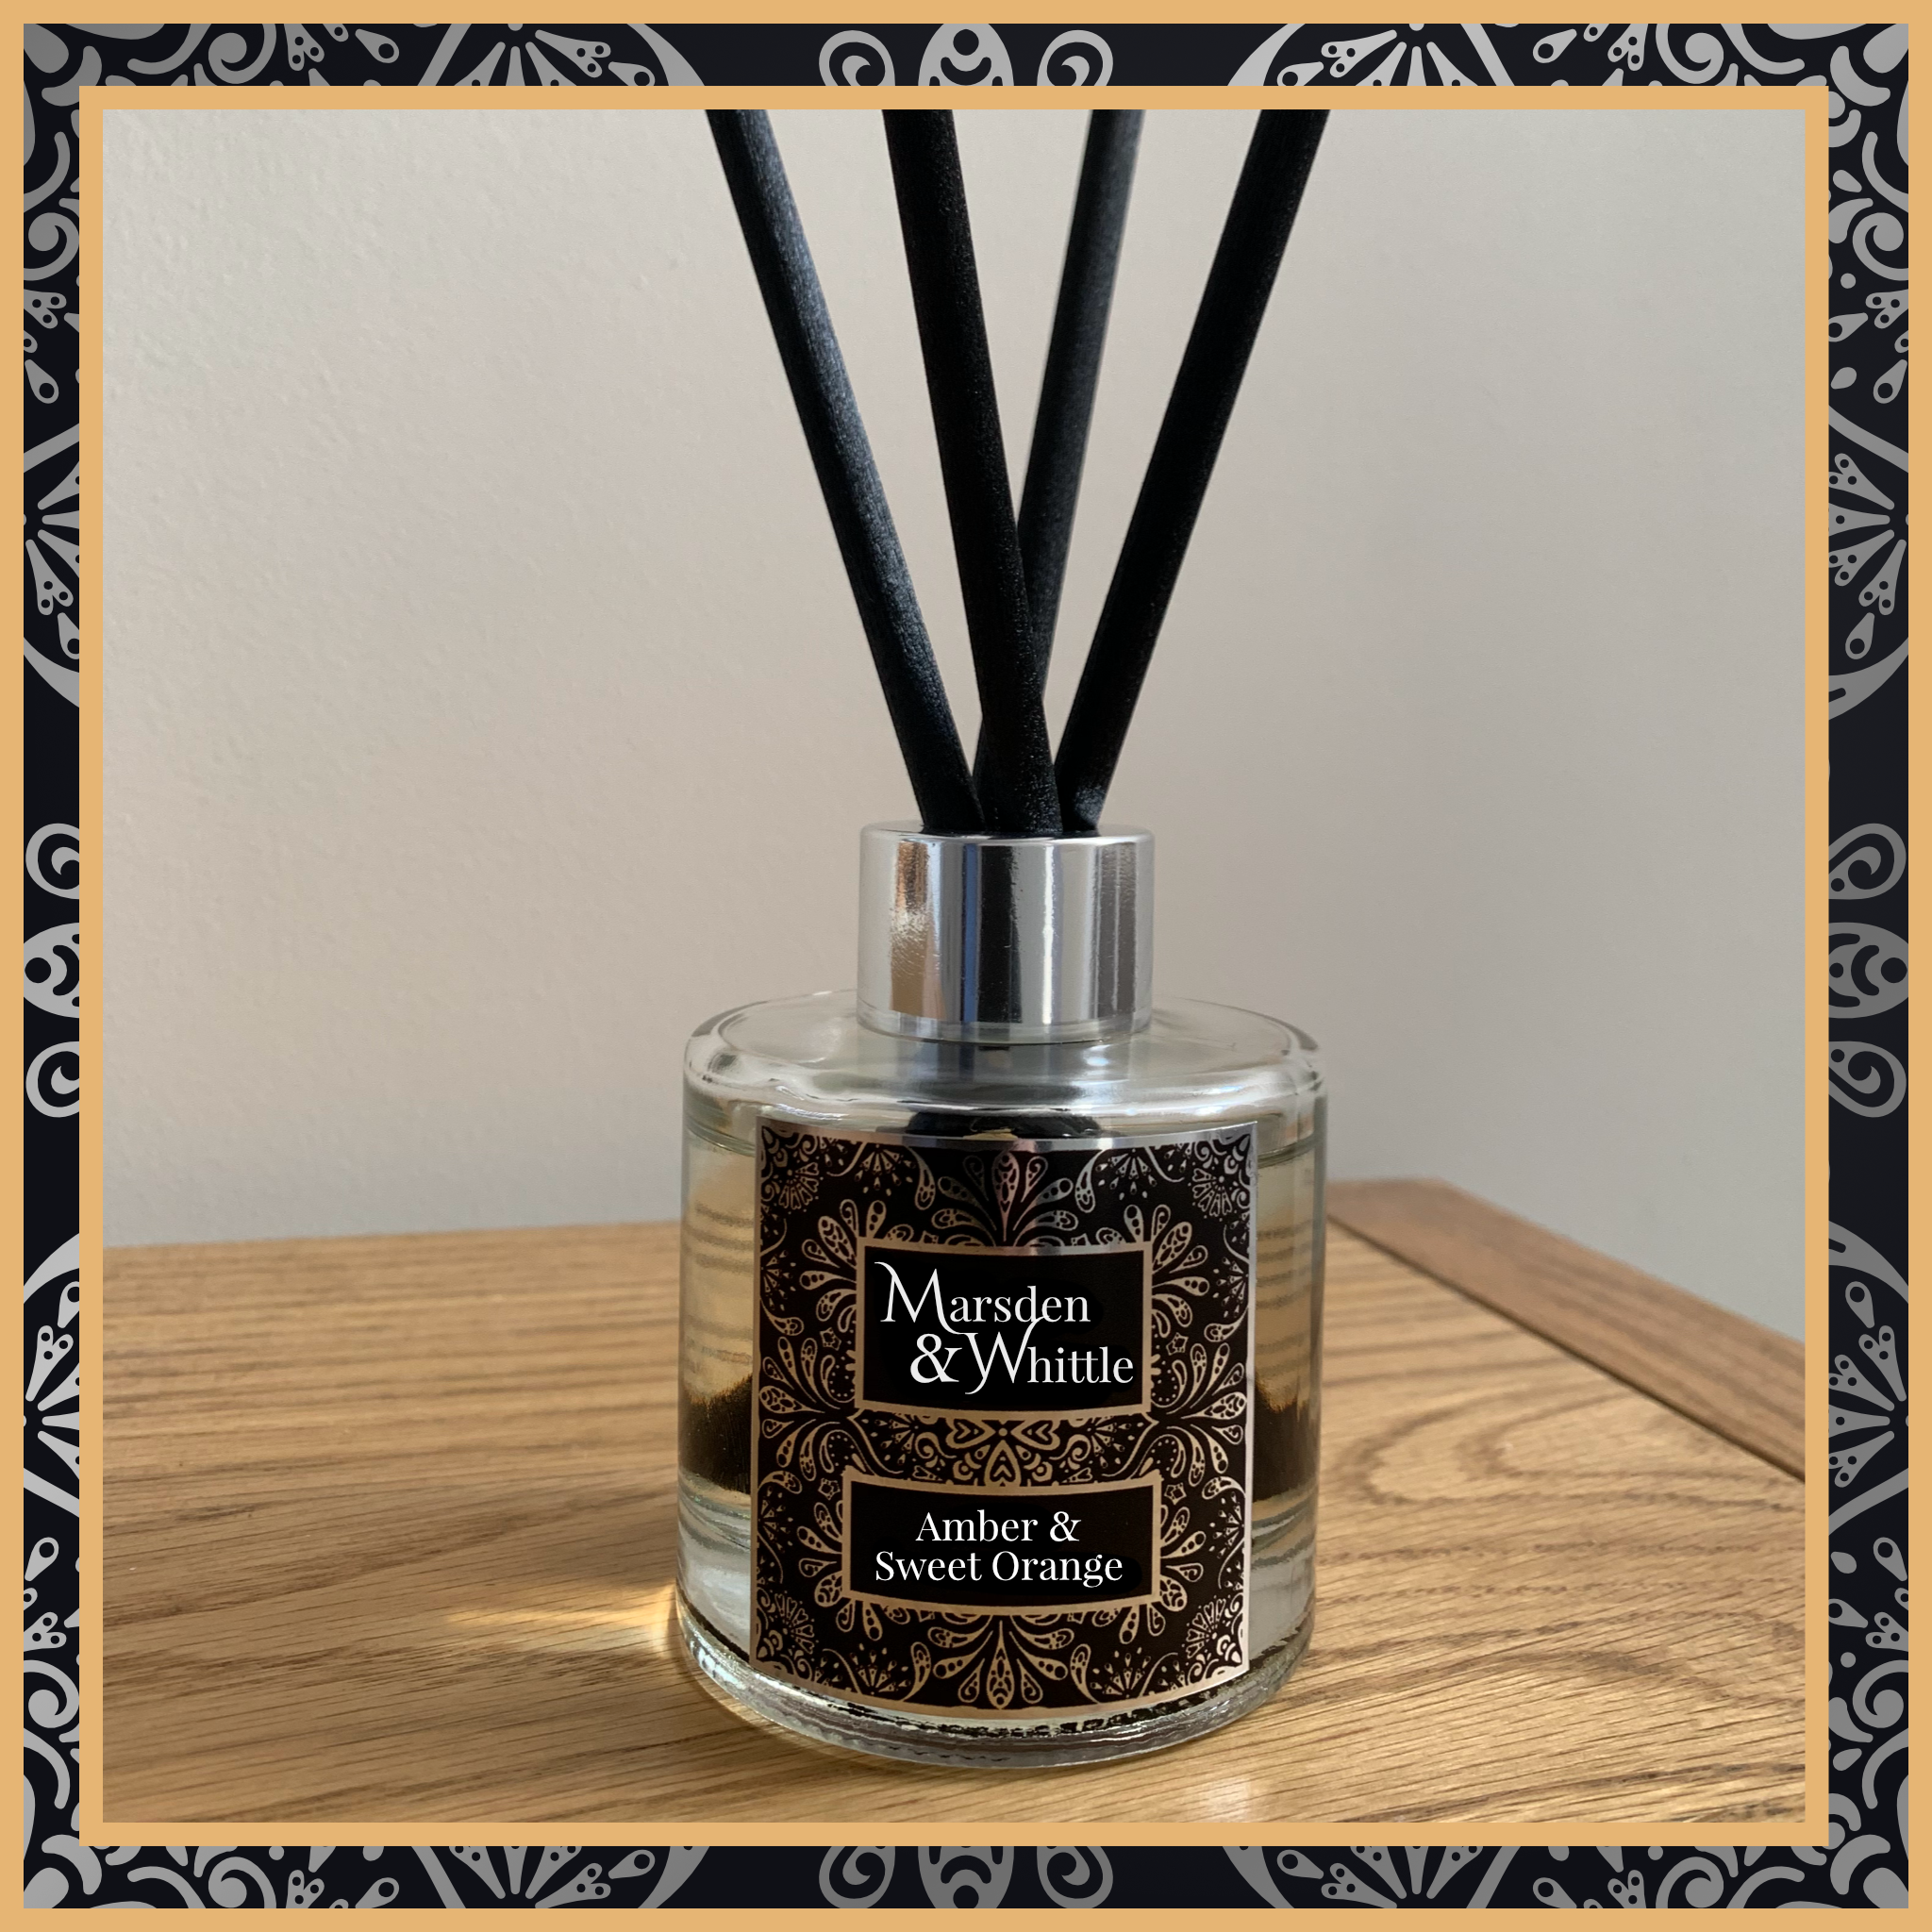 An Amber and Sweet Orange glass reed diffuser with black reeds and a silver chrome cap sitting on a wooden table.